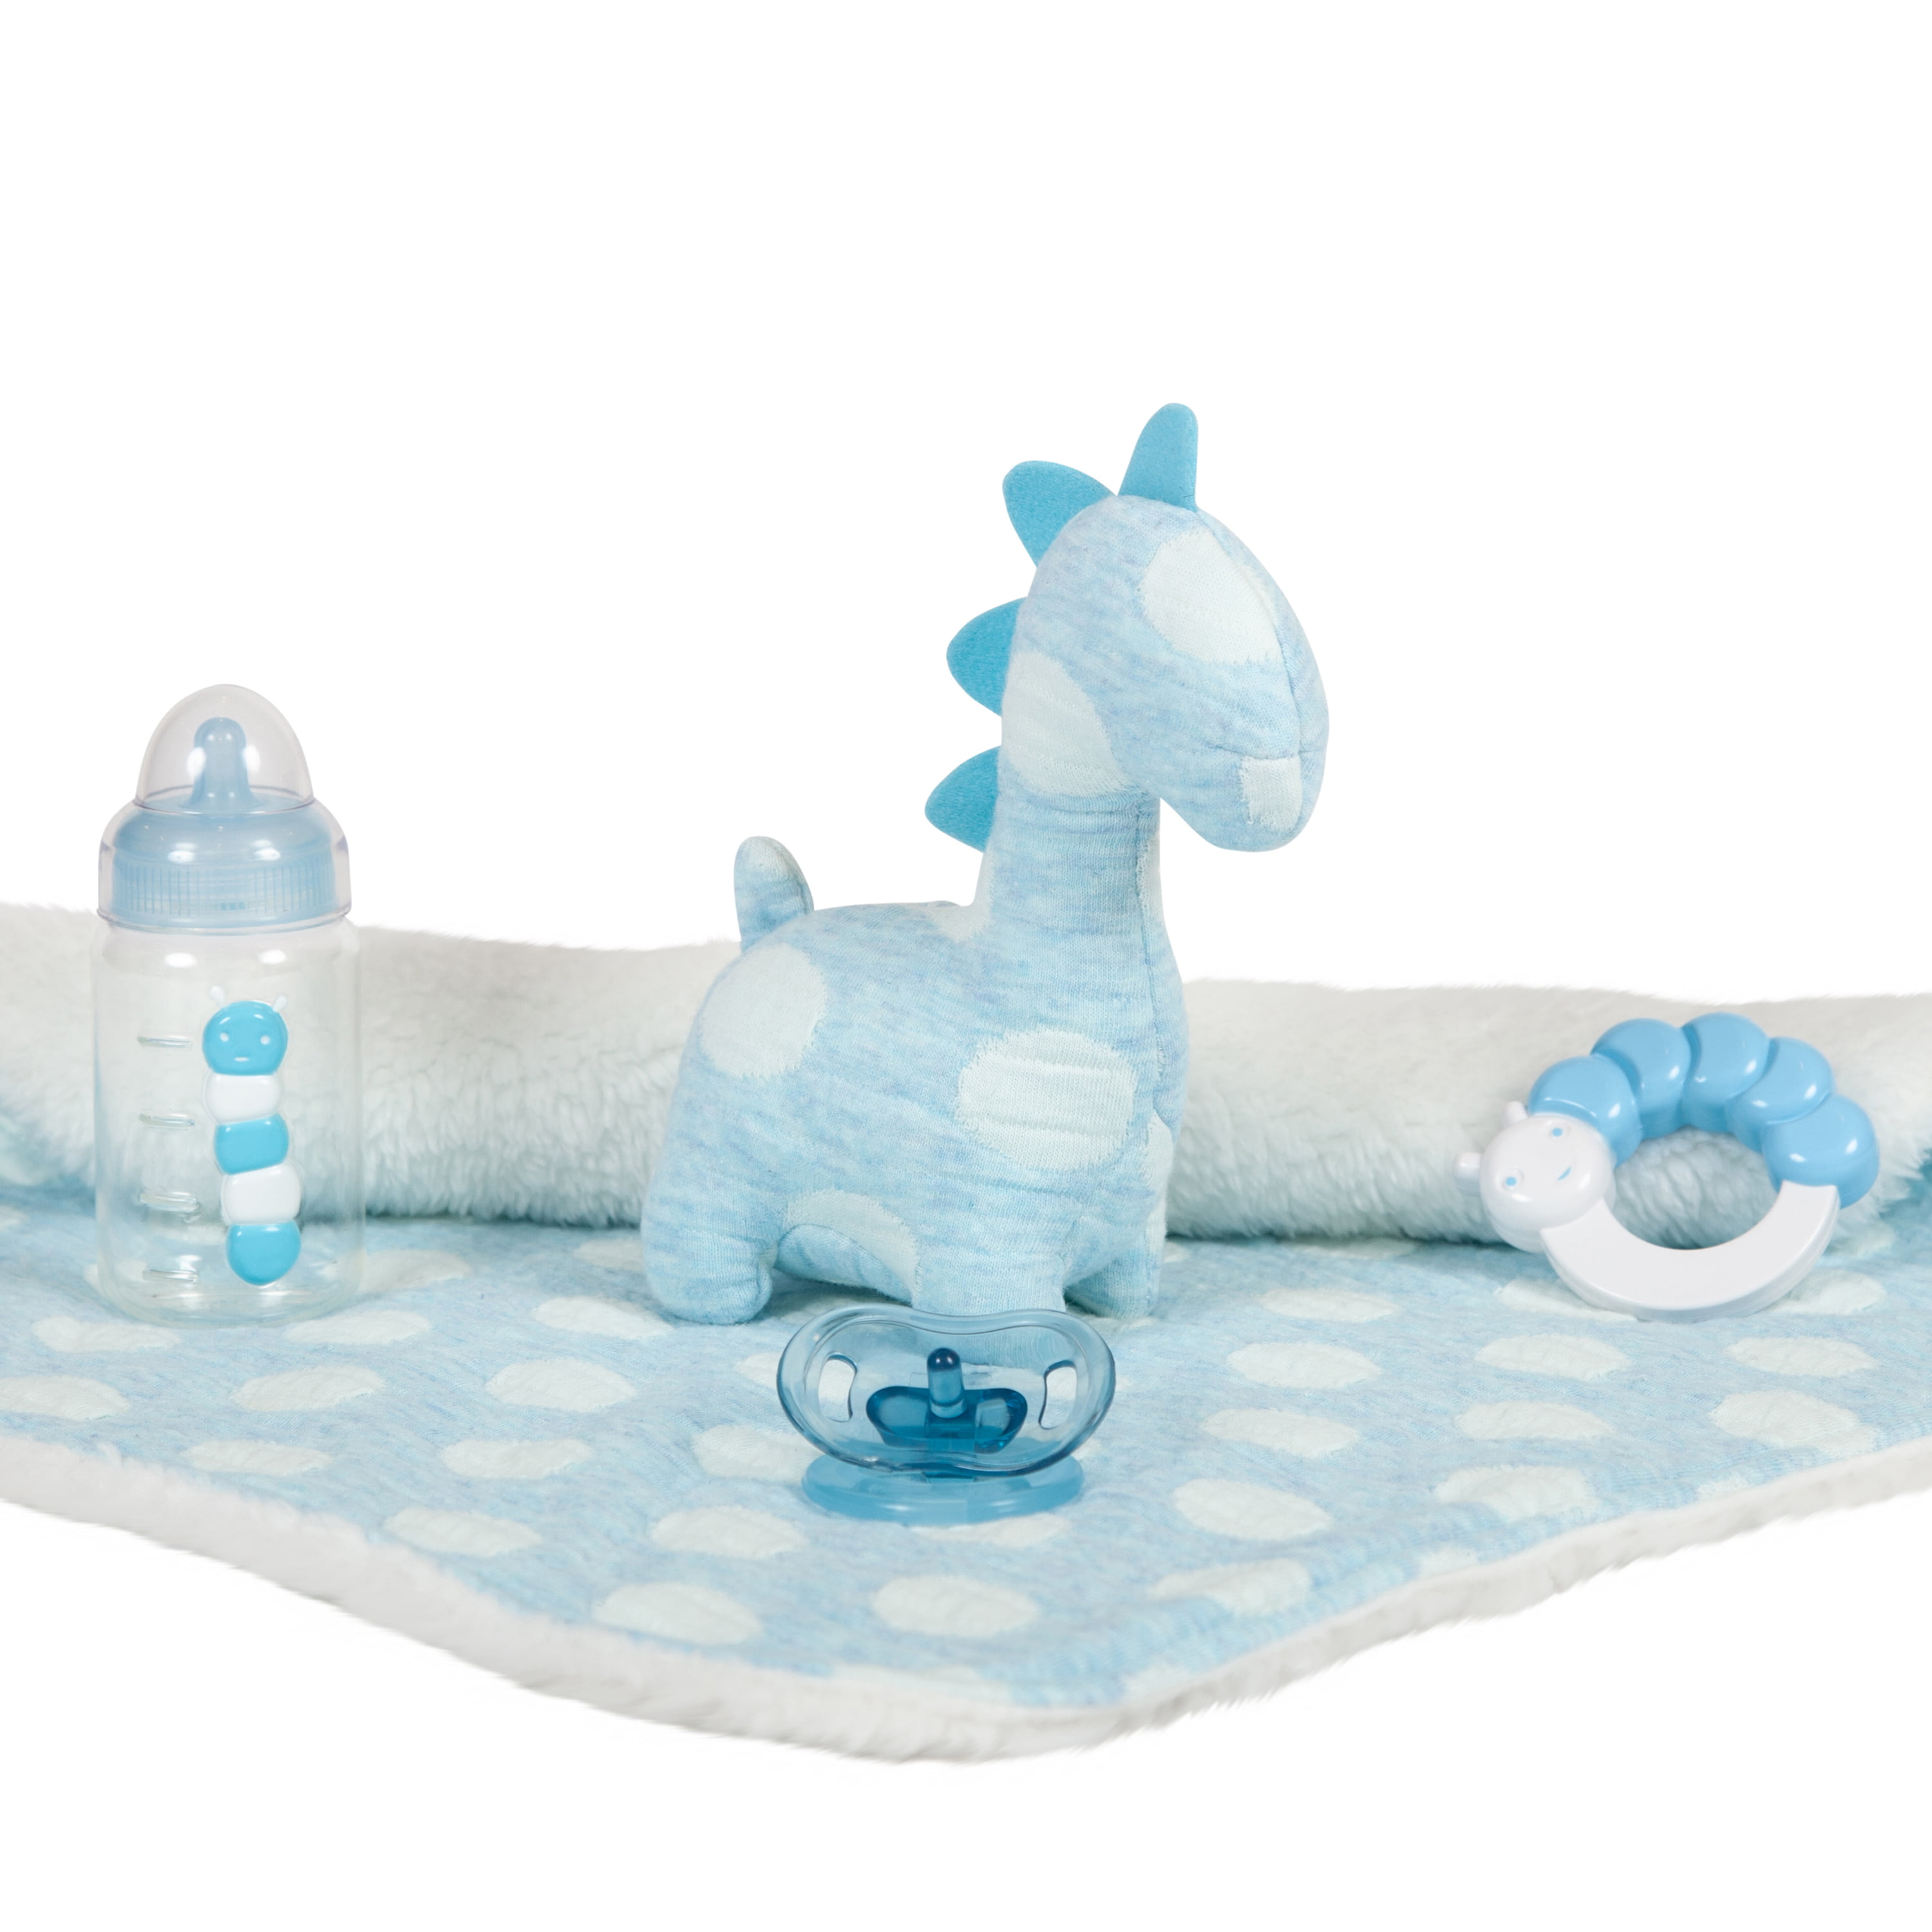 JC Toys La Newborn Allvinyl Real Boy 15 in Baby Doll-blue With White Polka Dots for sale online 